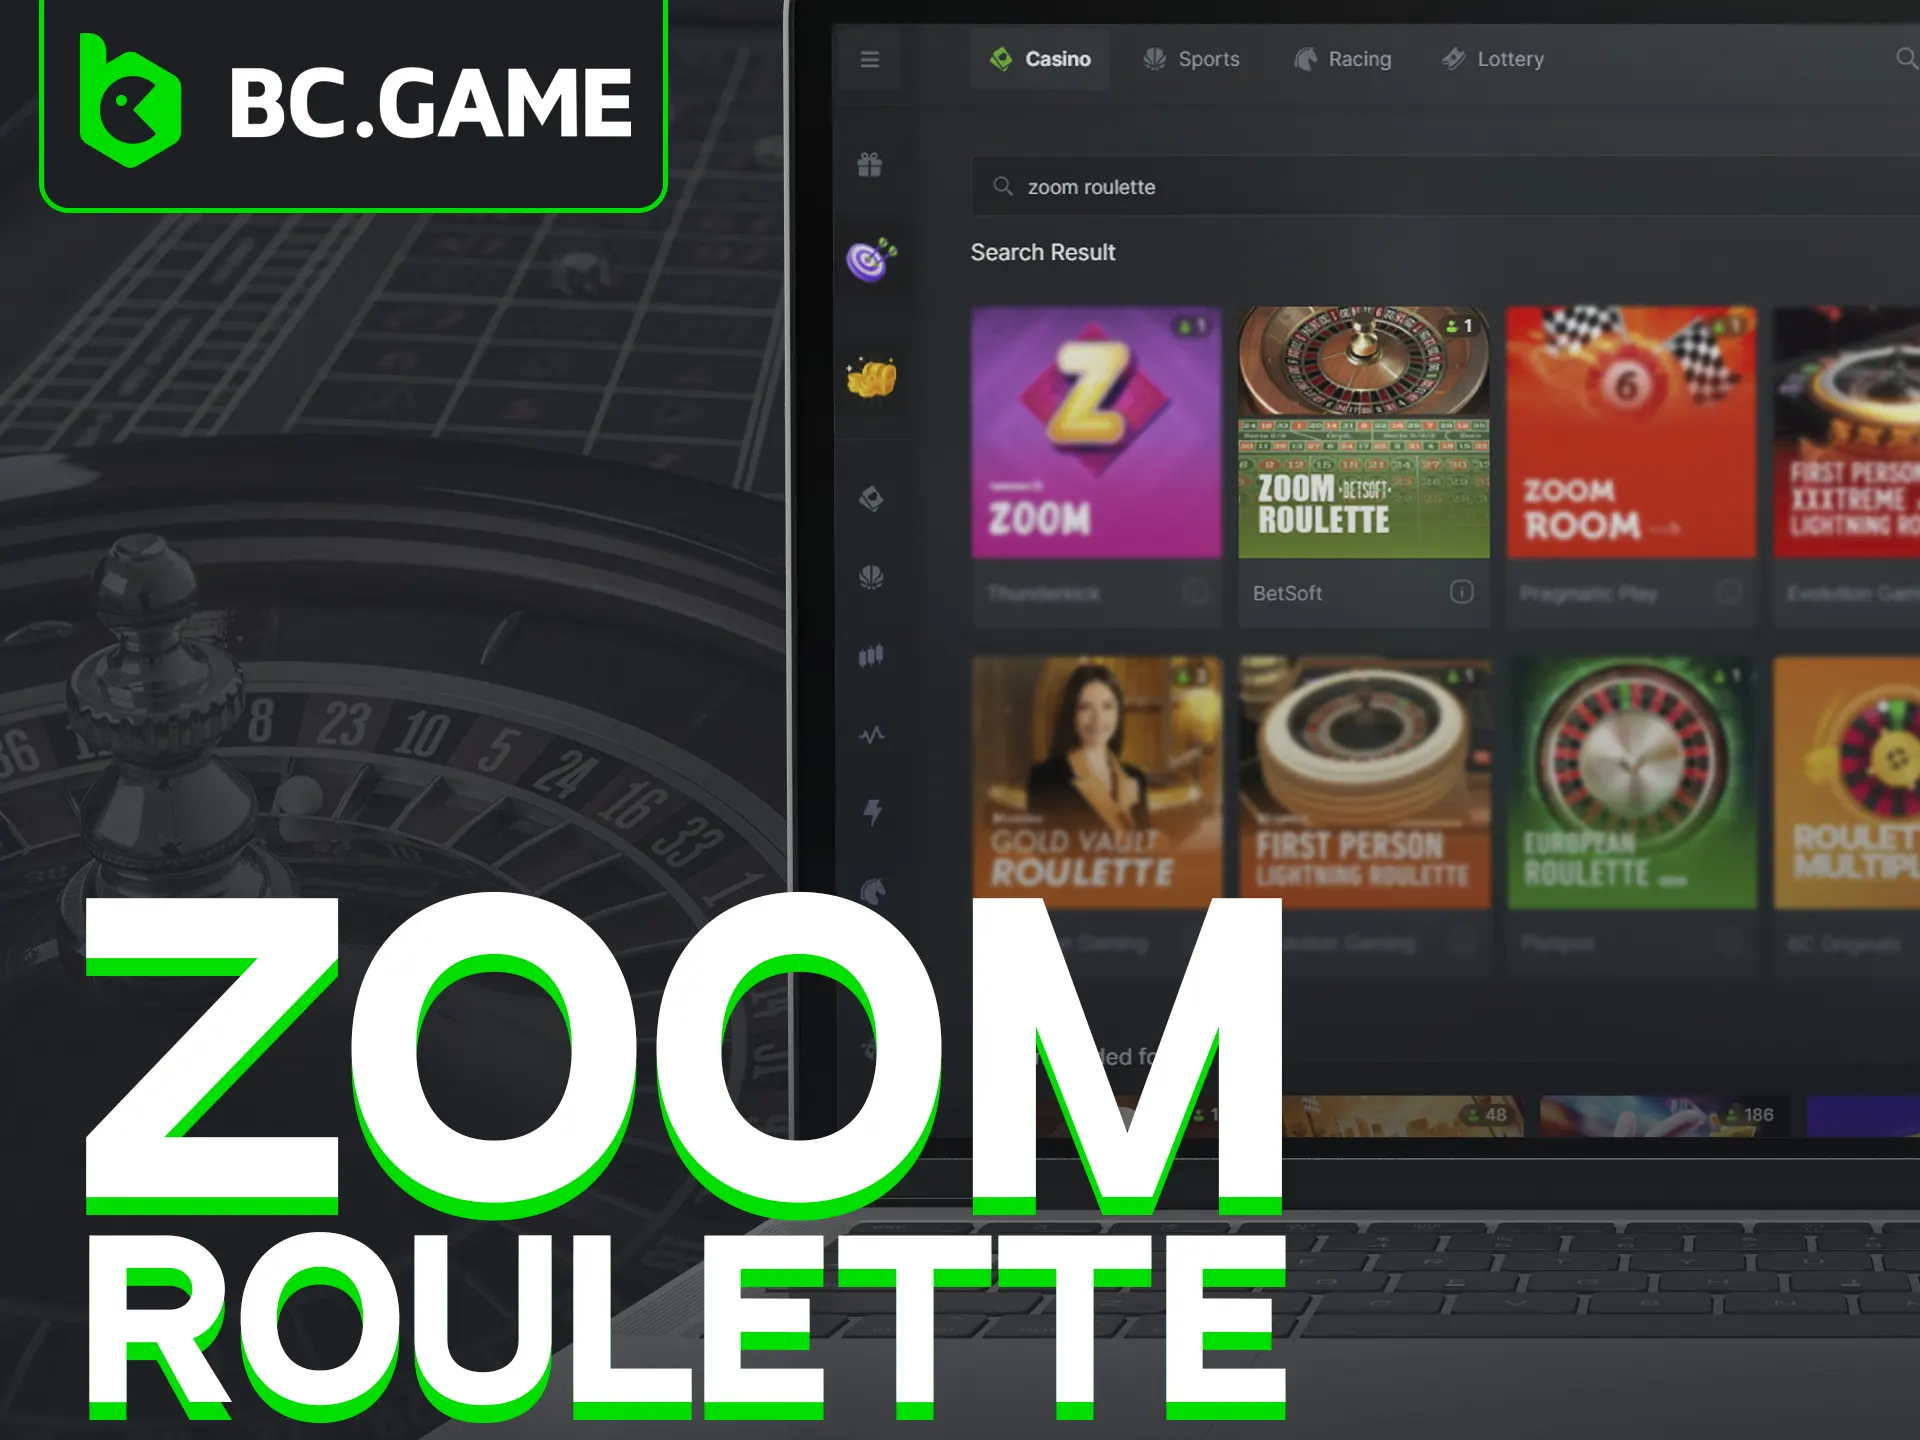 Experience Betsoft's Zoom Roulette for innovative gameplay.